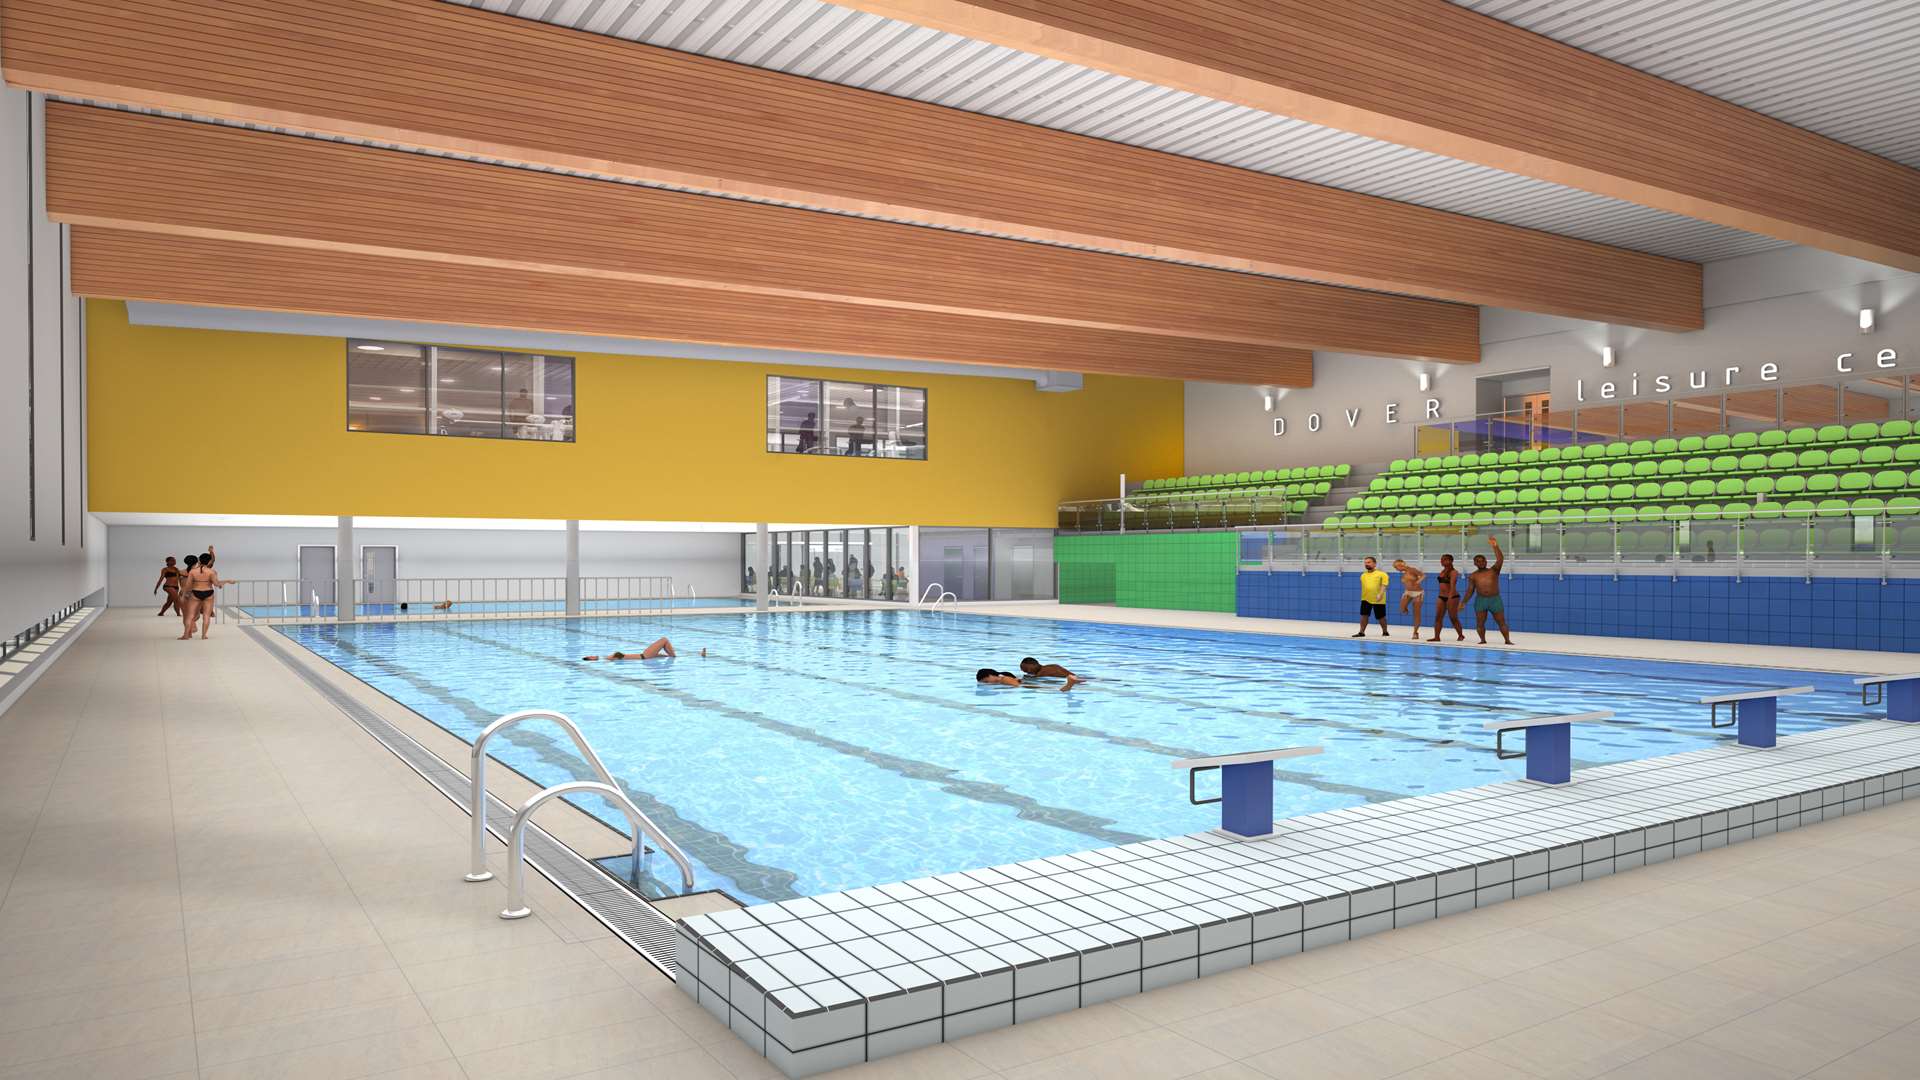 Latest artist's impression of the swimming pool at the planned Dover leisure centre.